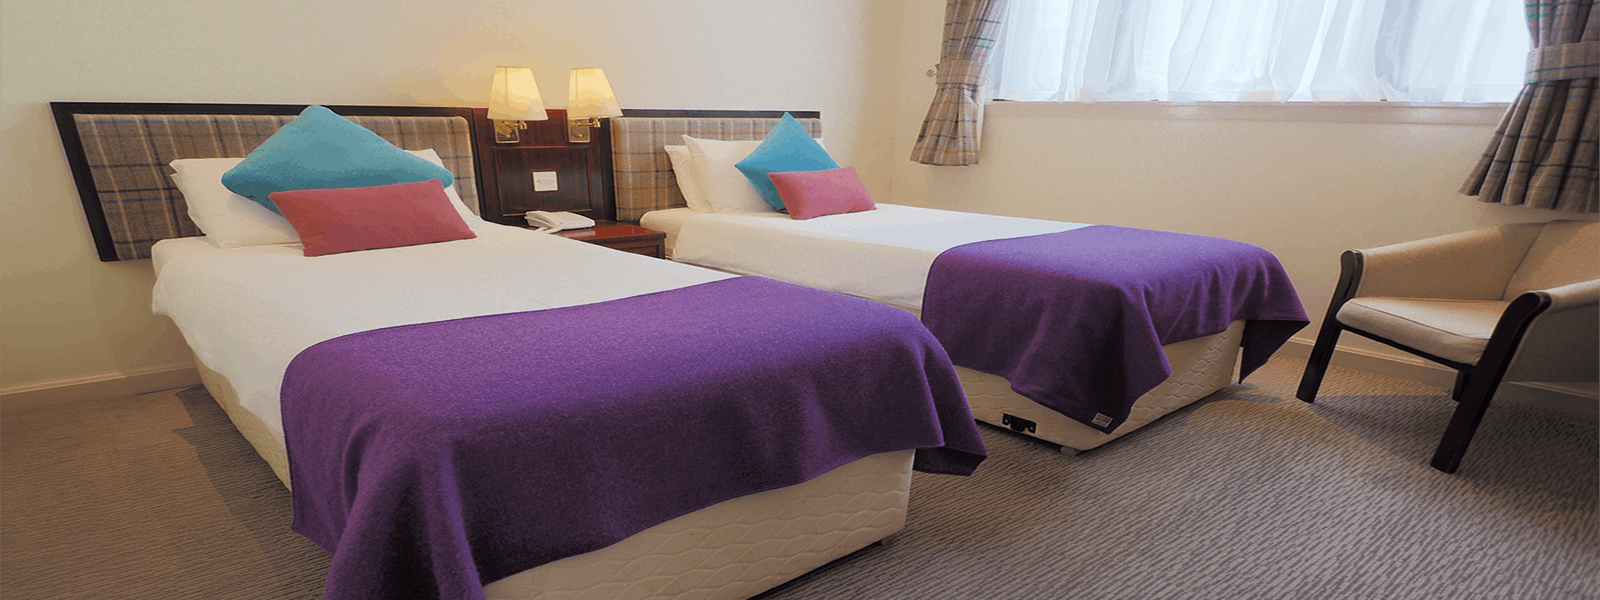 Twin room in the Caladh Inn Hotel, Stornoway Isle of Lewis